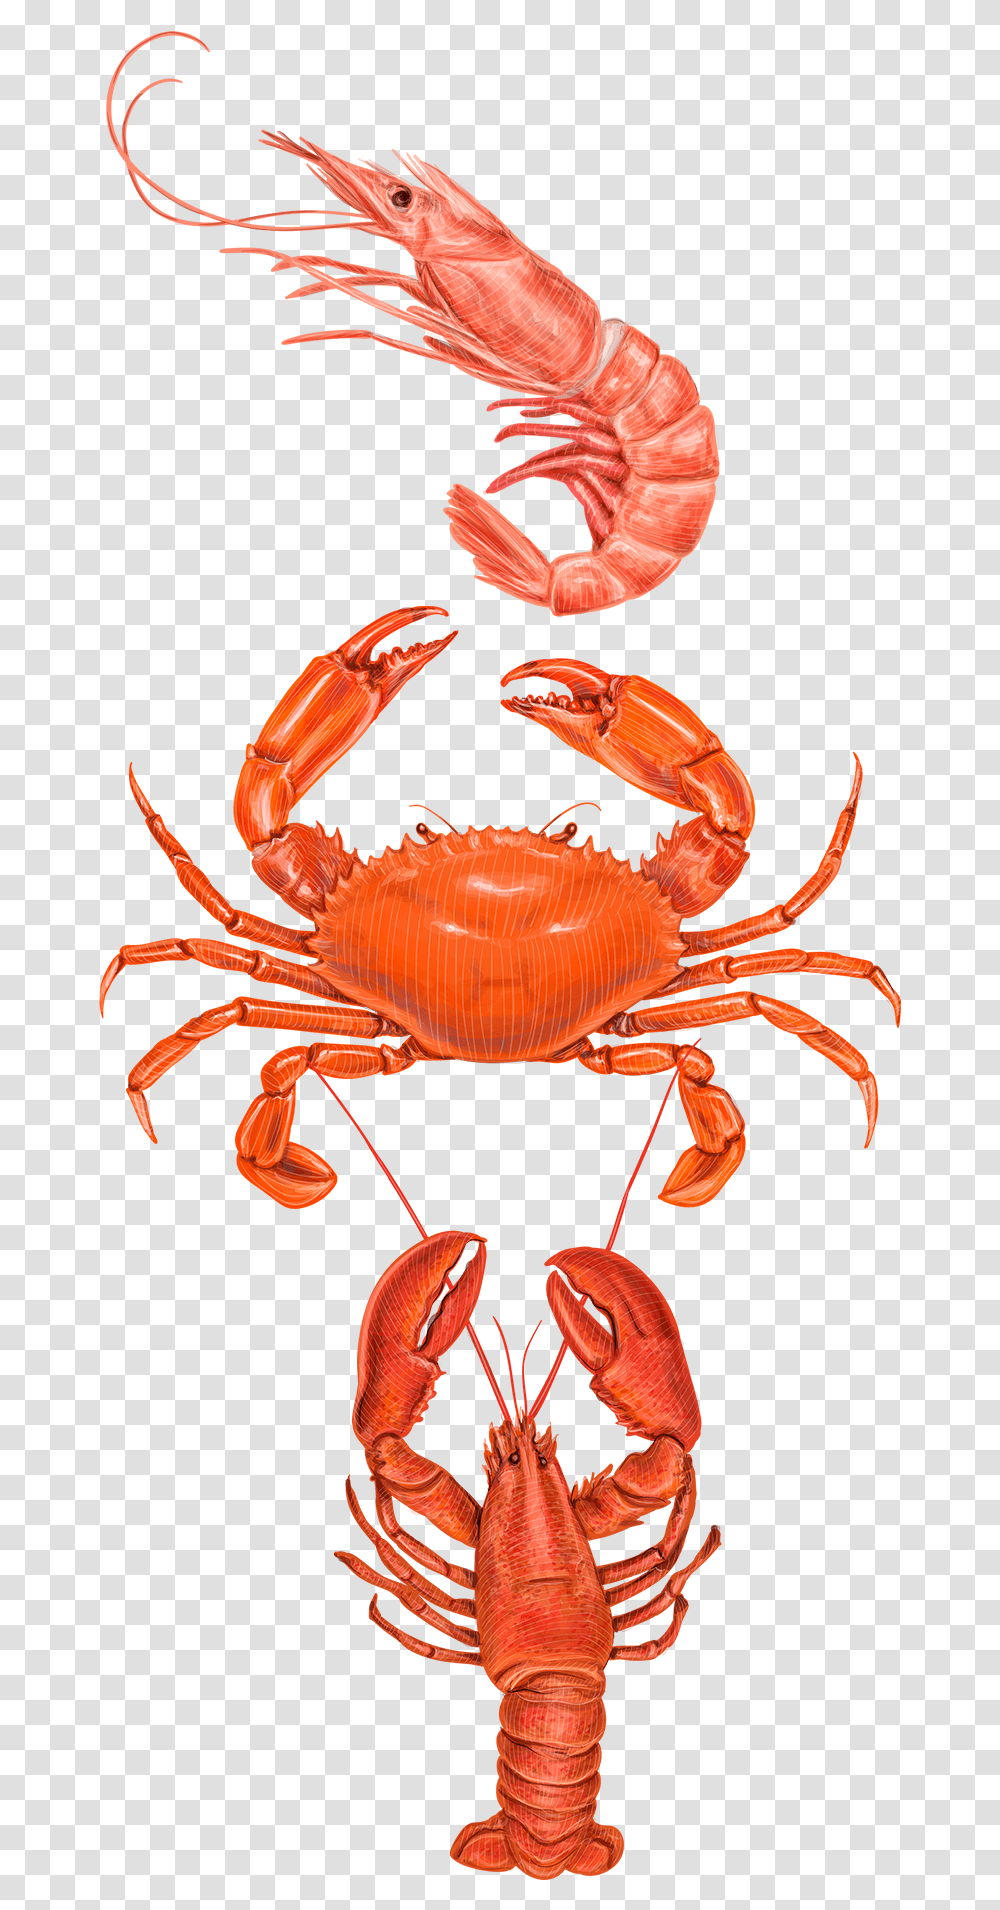 Crabs Clipart Prawn Fish Types Of Crabs In The Philippines, Seafood, Sea Life, Animal, King Crab Transparent Png